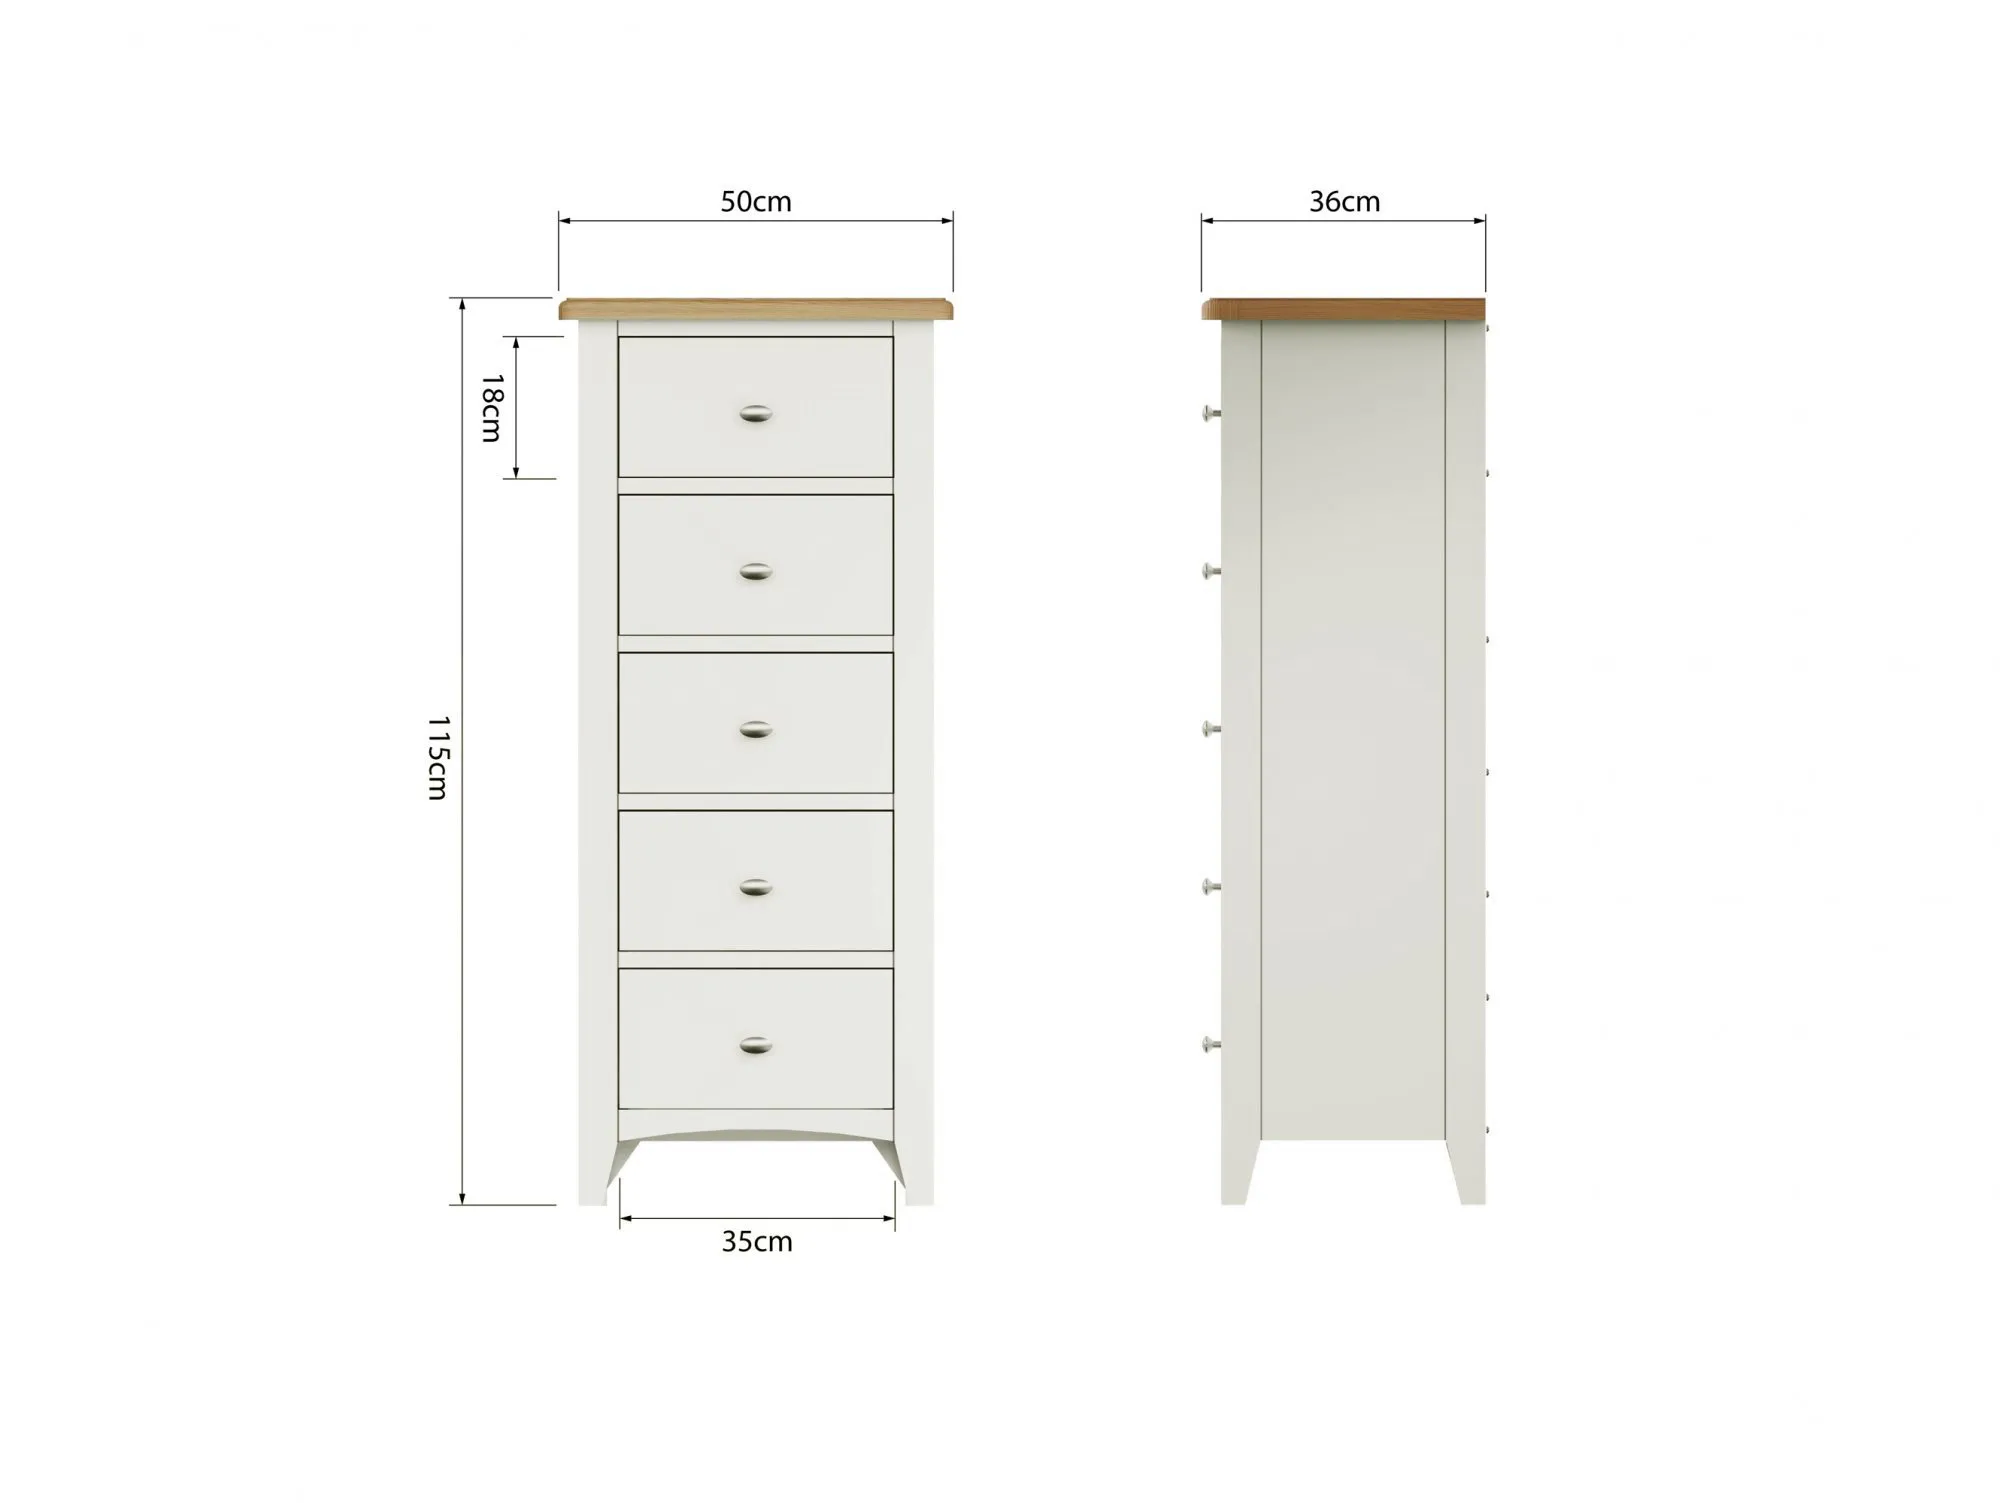 Kenmore Kenmore Patterdale White and Oak 5 Drawer Tall Narrow Chest of Drawers (Assembled)